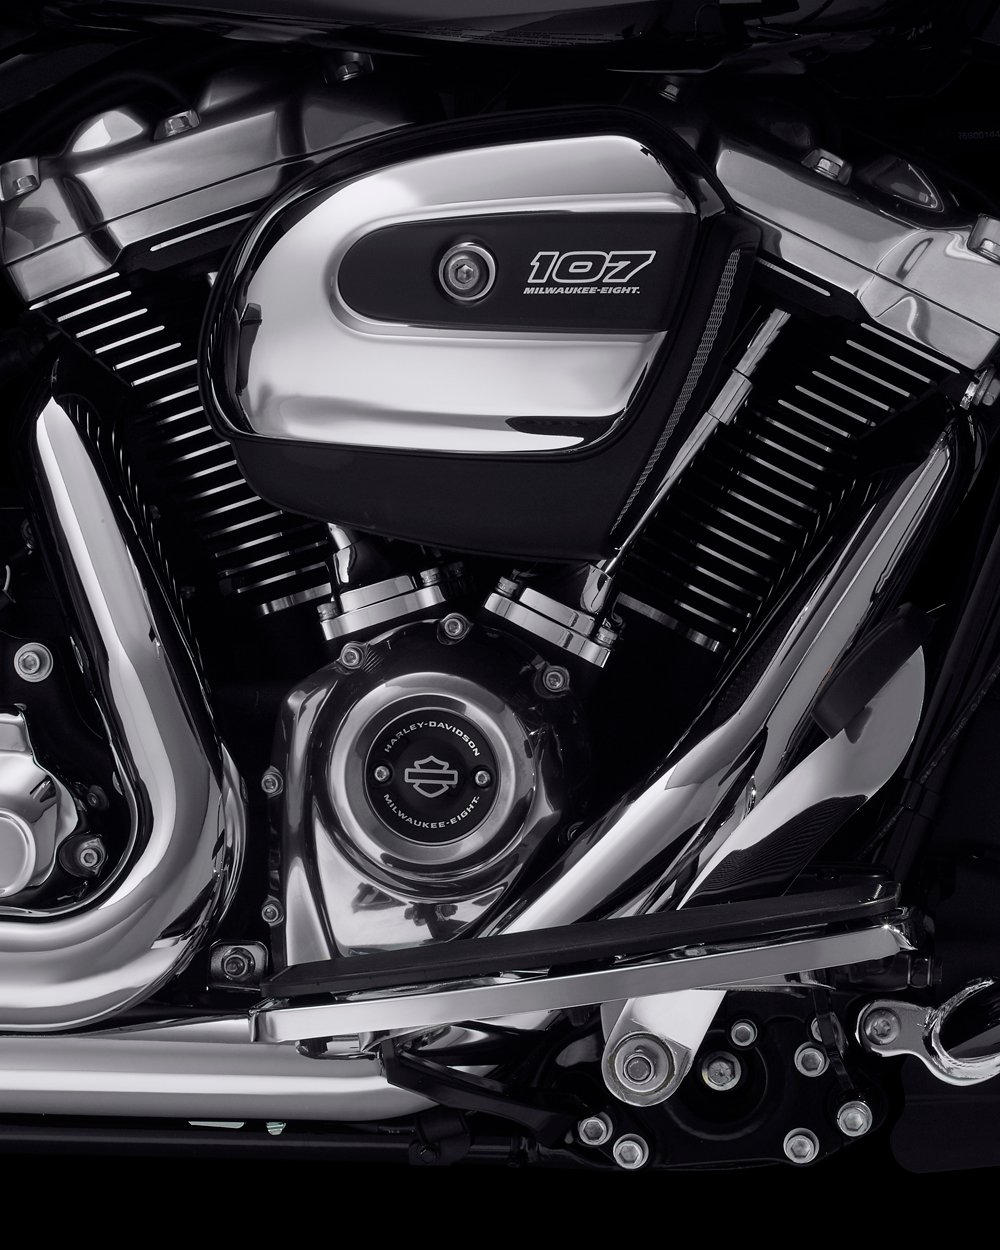 2022 Electra Glide Standard Motorcycle Milwaukee-Eight V-twin Engine